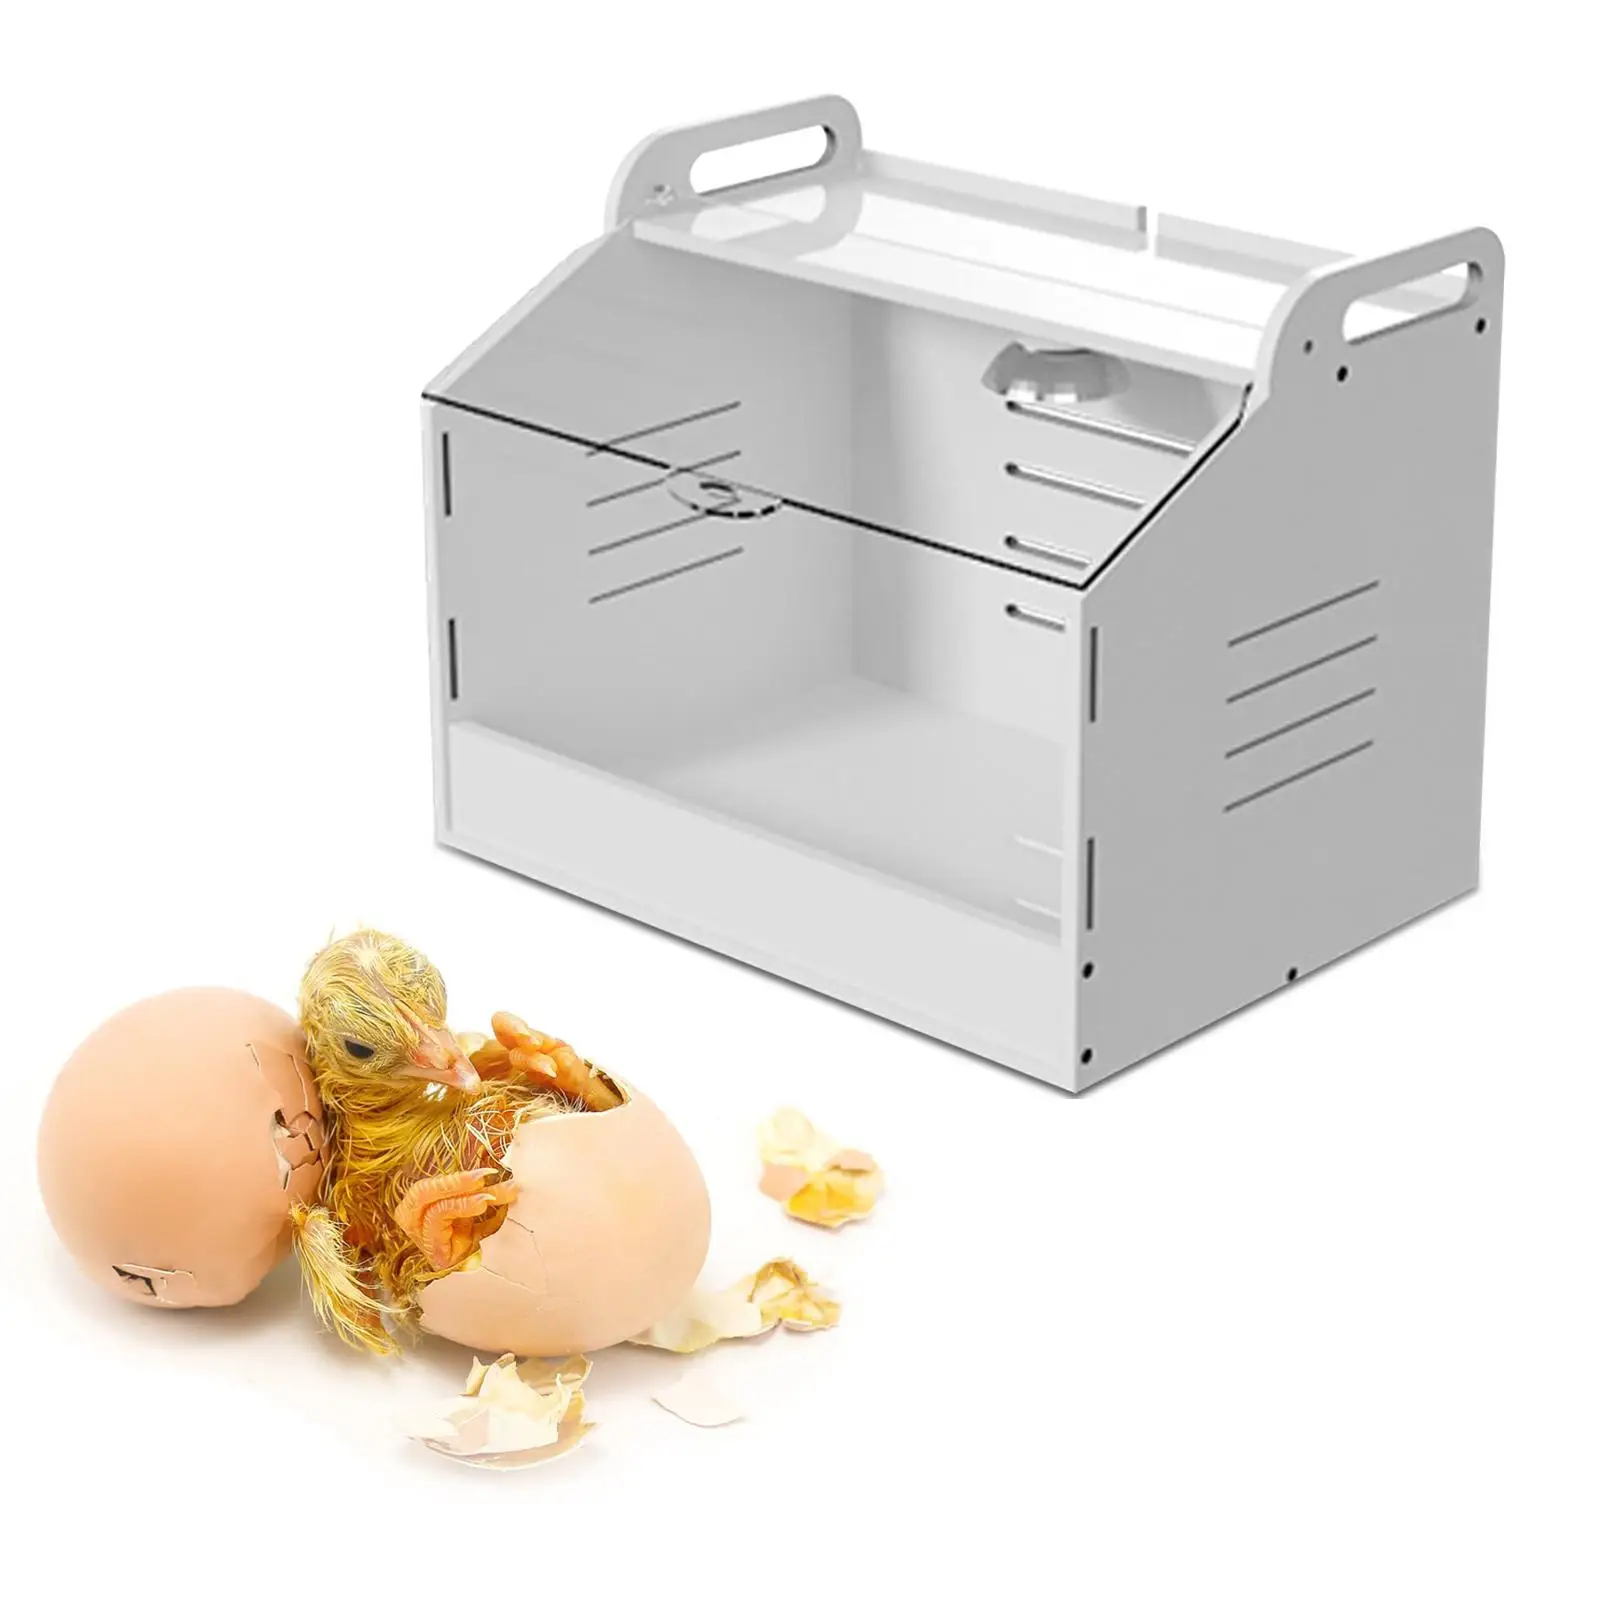 Egg Incubator Hatching Flame Retardant Poultry Farm Equipment Automatic Poultry Hatcher Machine for Duck Eggs Chicken Bird Quail